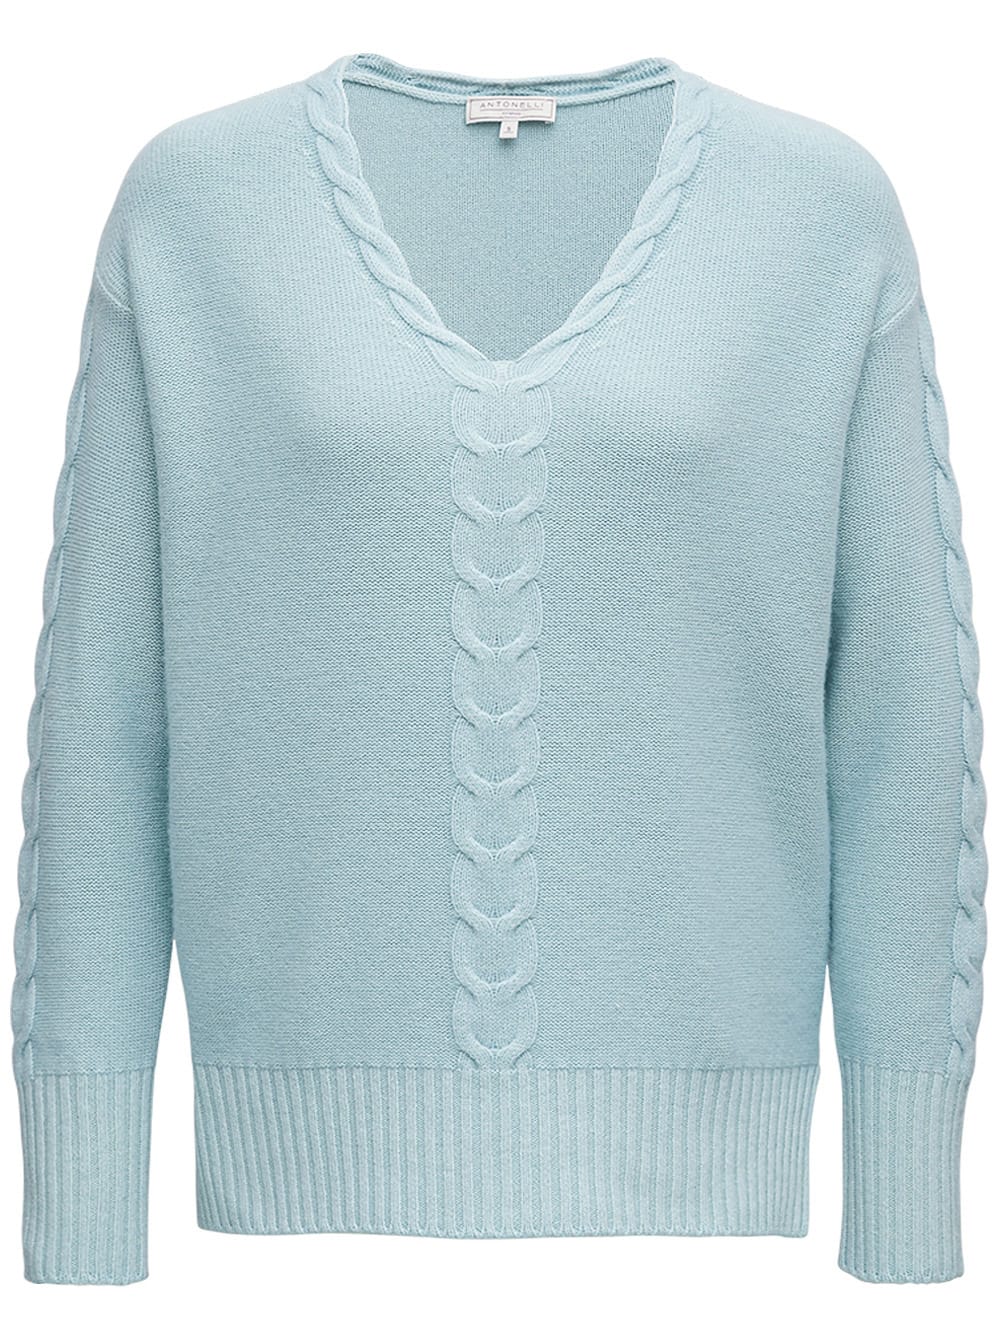 Antonelli Light Blue Wool Blend Sweater With Braided Front Detail